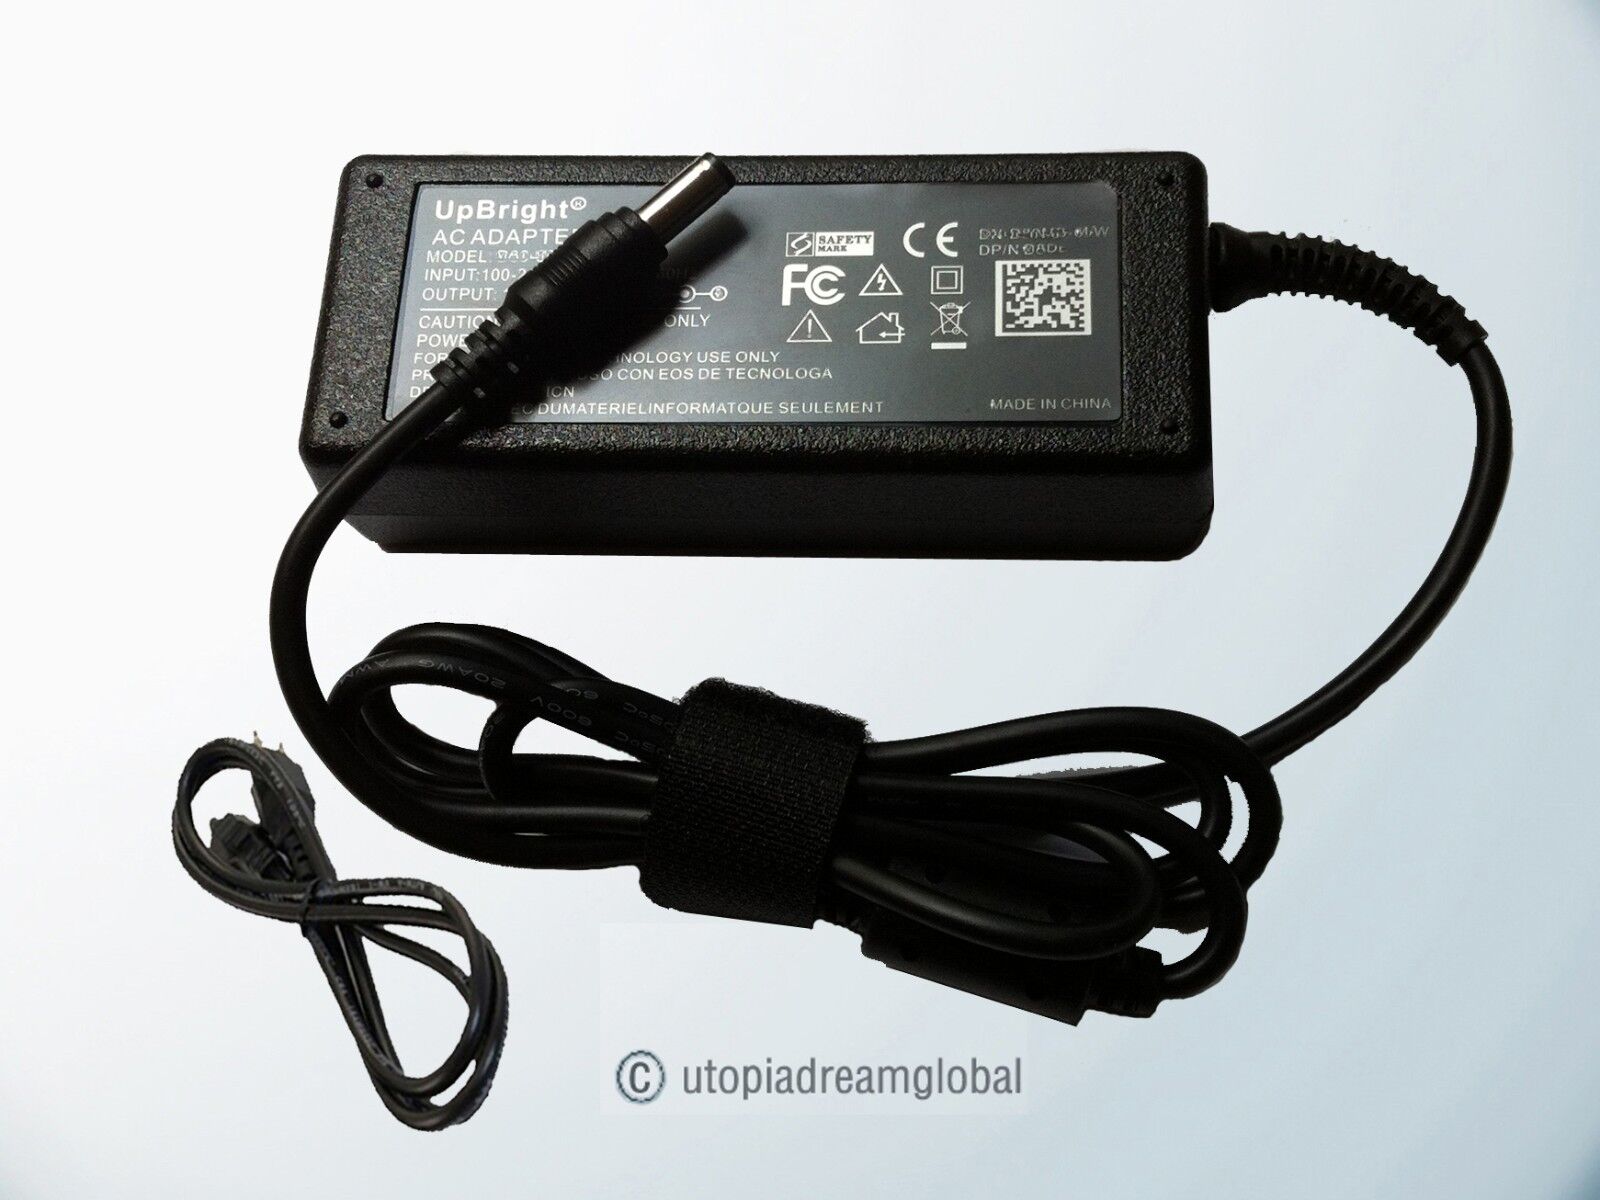 AC Adapter For Buffalo LinkStation Pro Duo LS-WV2.0TL/R1 R Network Storage NAS